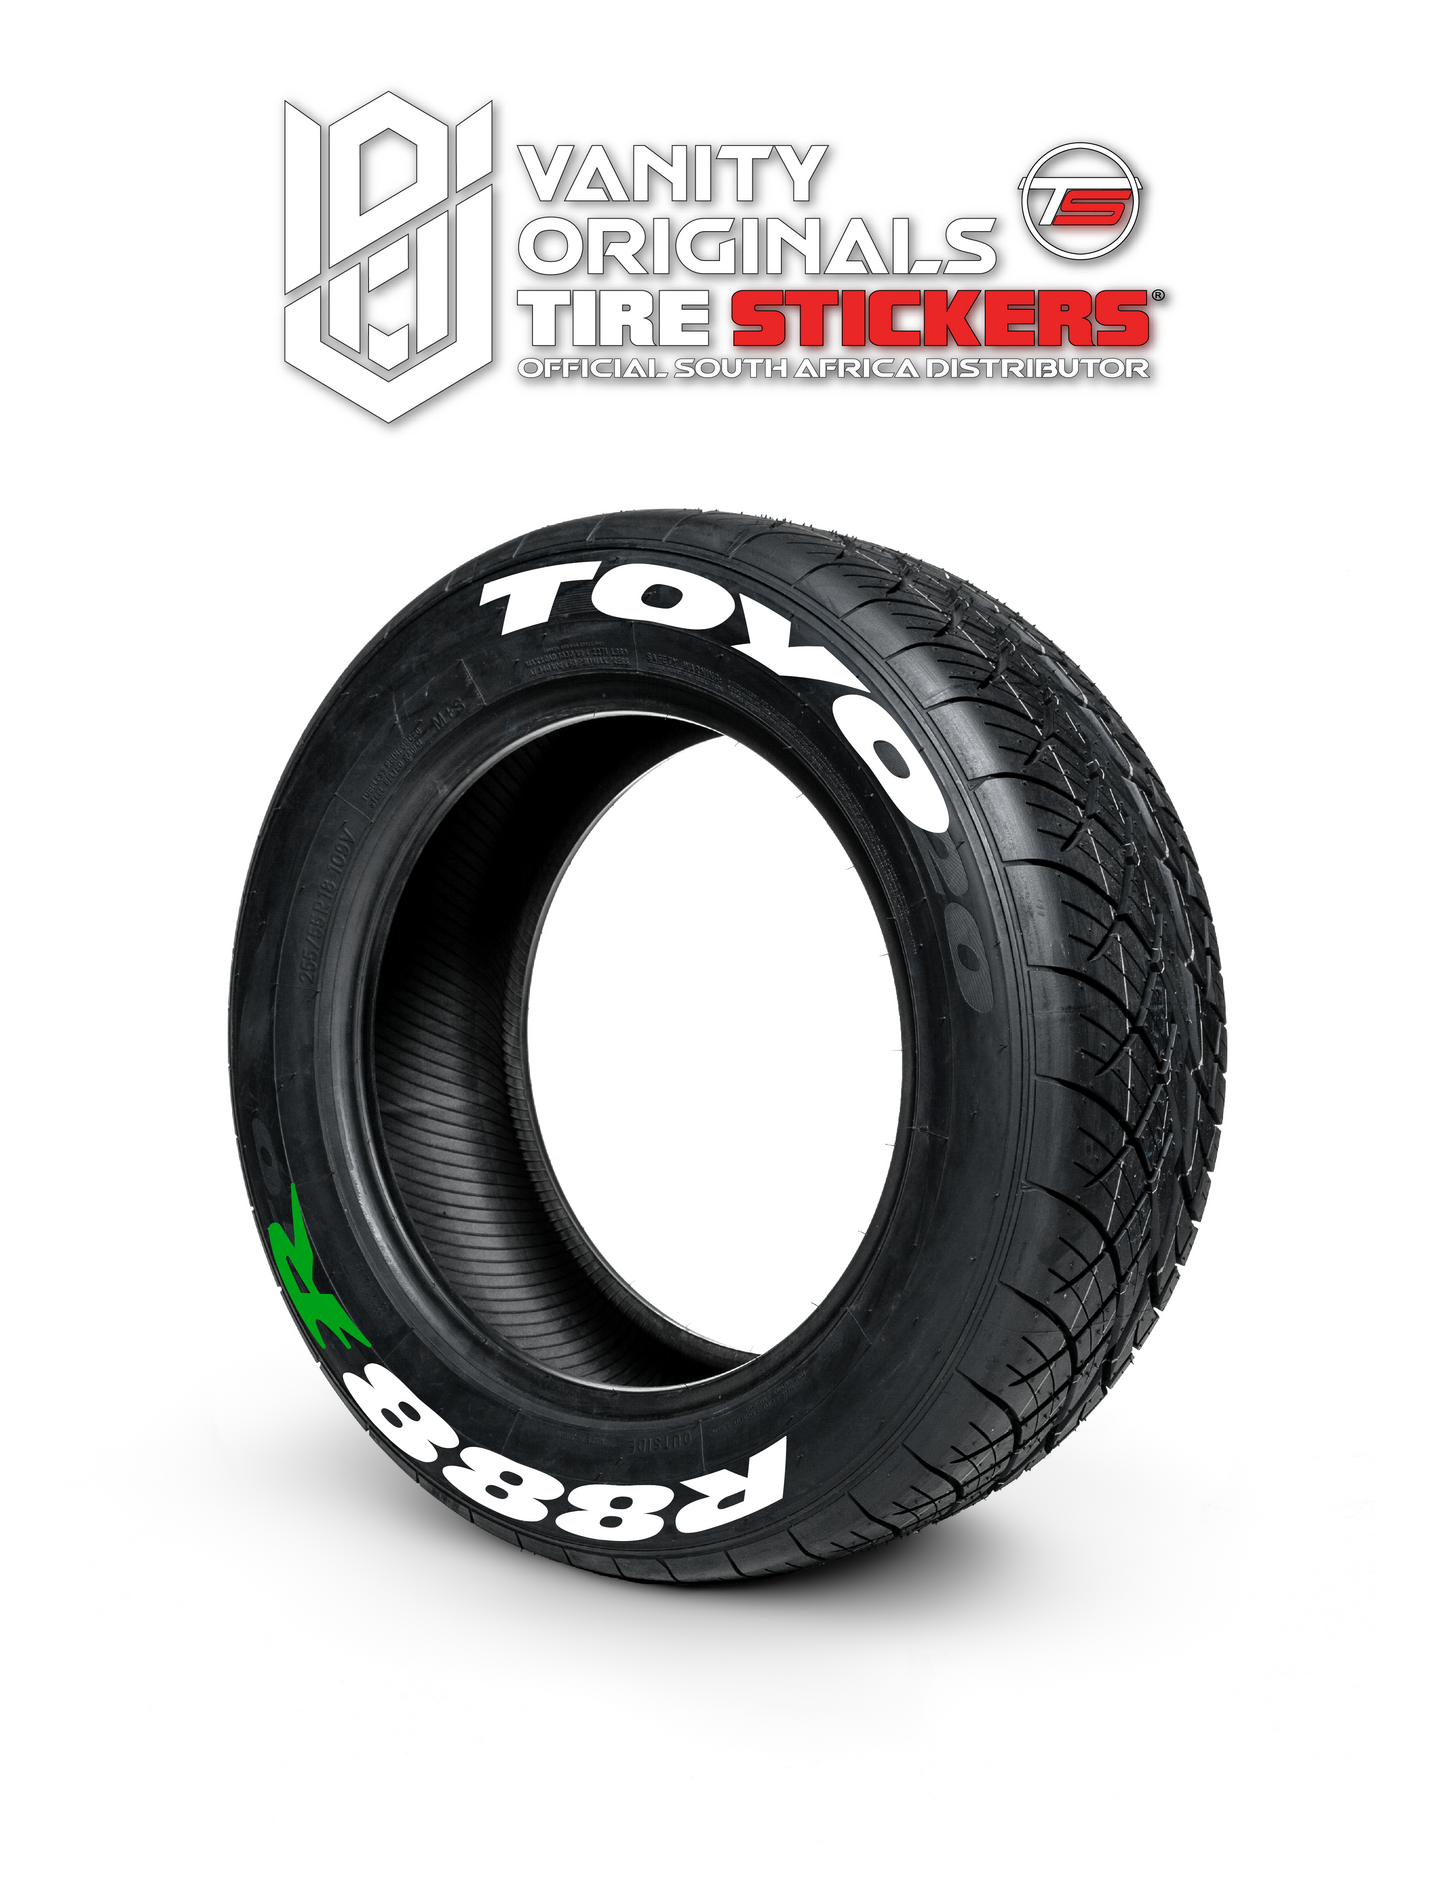 Toyo R888 R ( 8x Rubber Decals, Adhesive & Instructions Included )